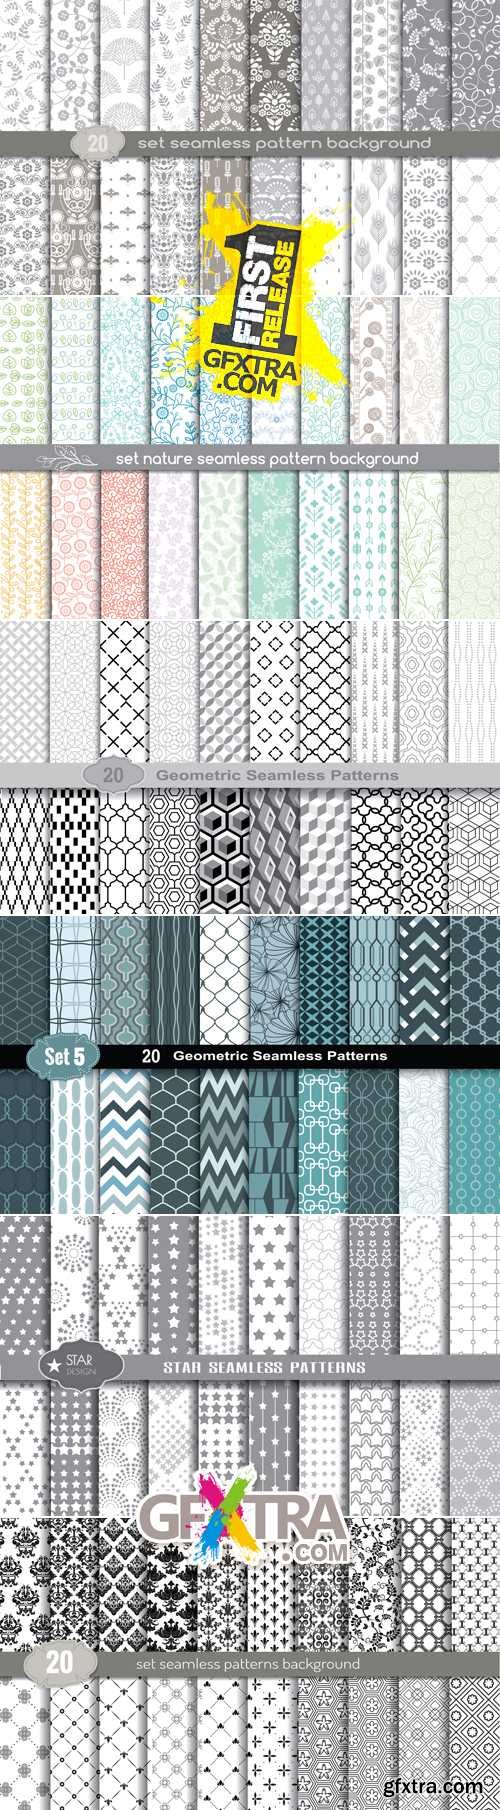 Seamless Patterns Vector Collection 2